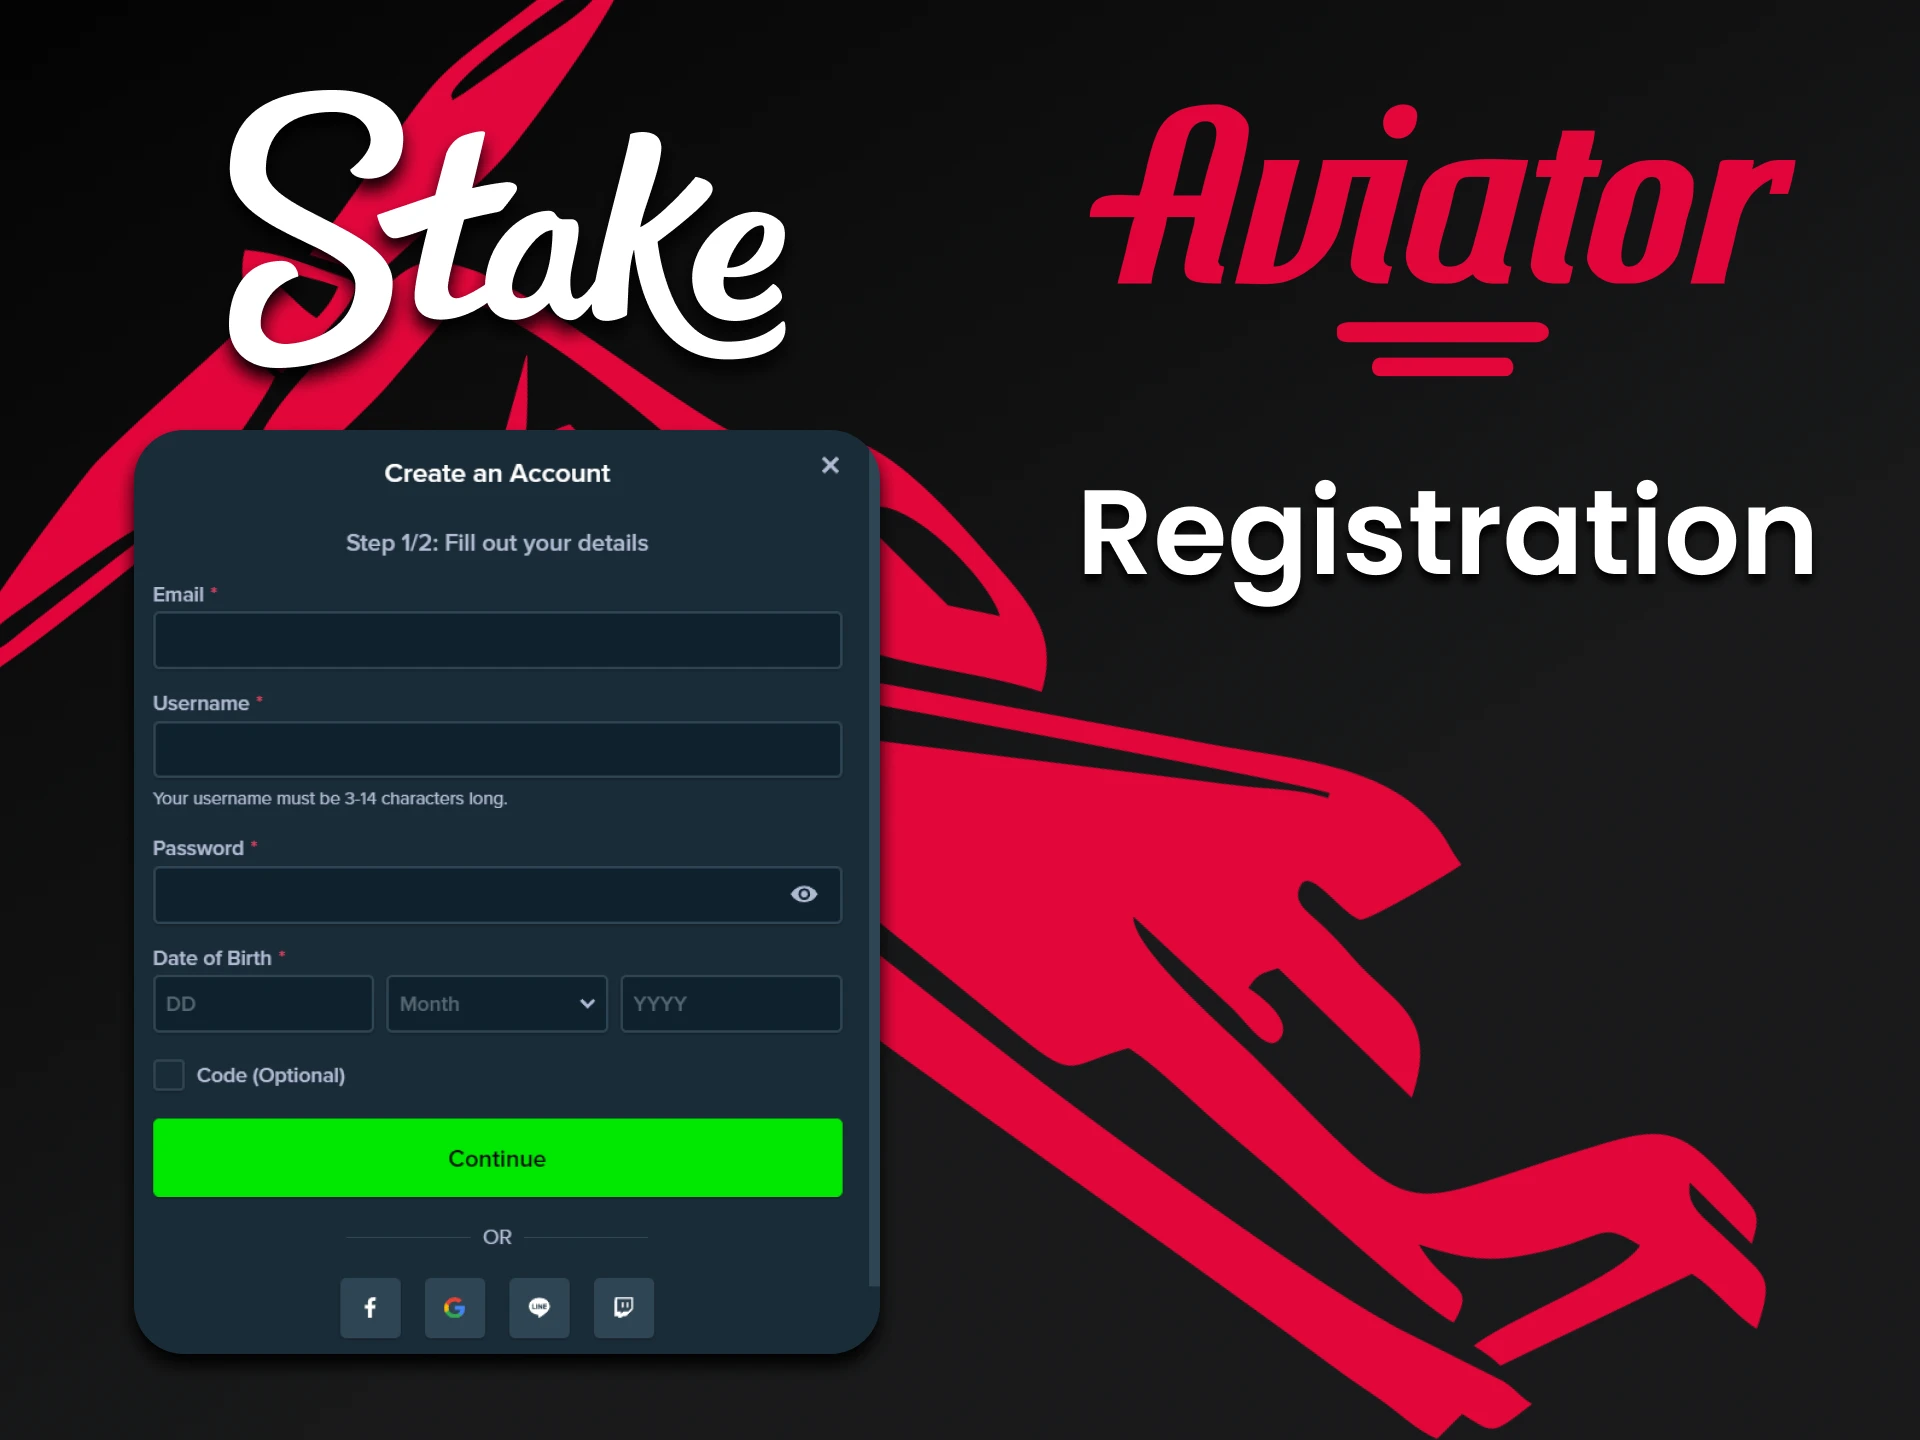 Register for Stake to play Aviator.